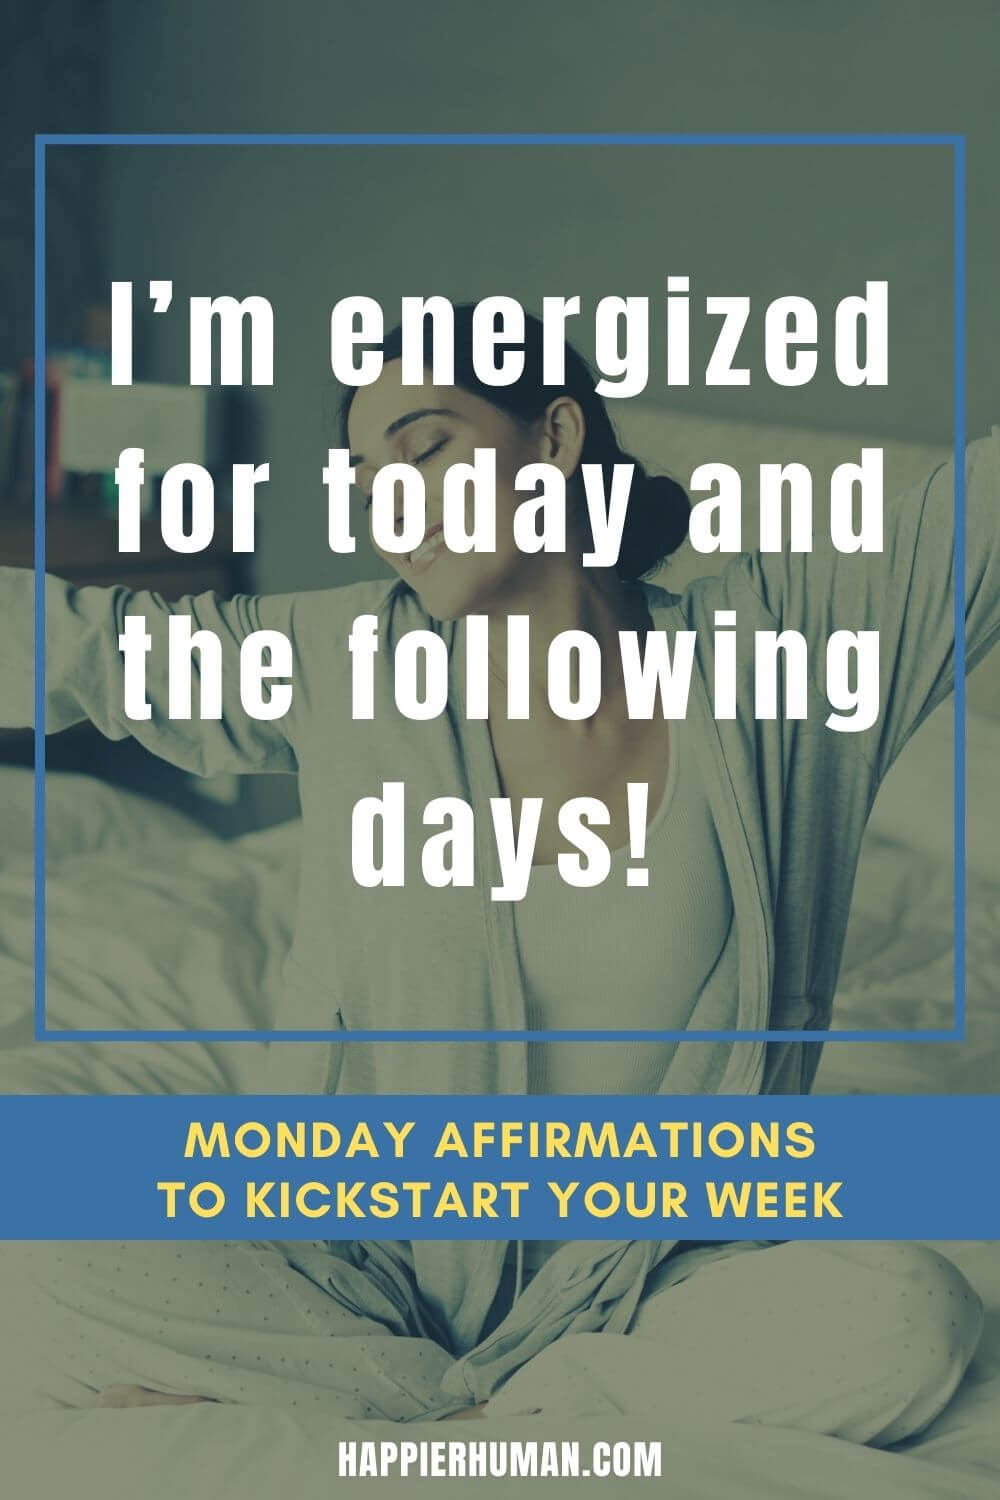 Monday Affirmations - I’m energized for today and the following days! | monday affirmations images | daily affirmations | morning affirmations